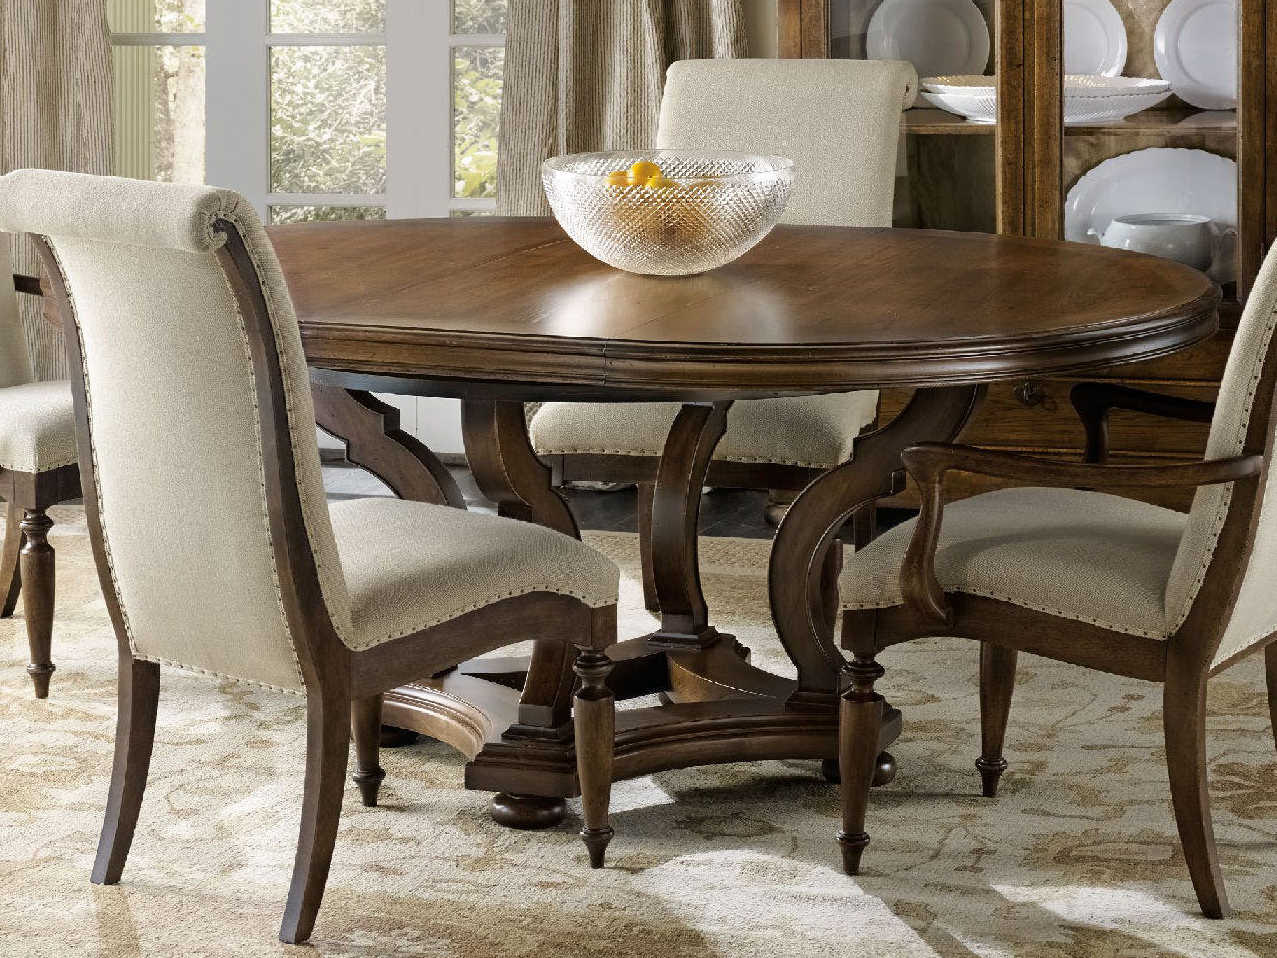 Luxe Designs 54 Wide Round Dining, Round Wood Dining Room Tables